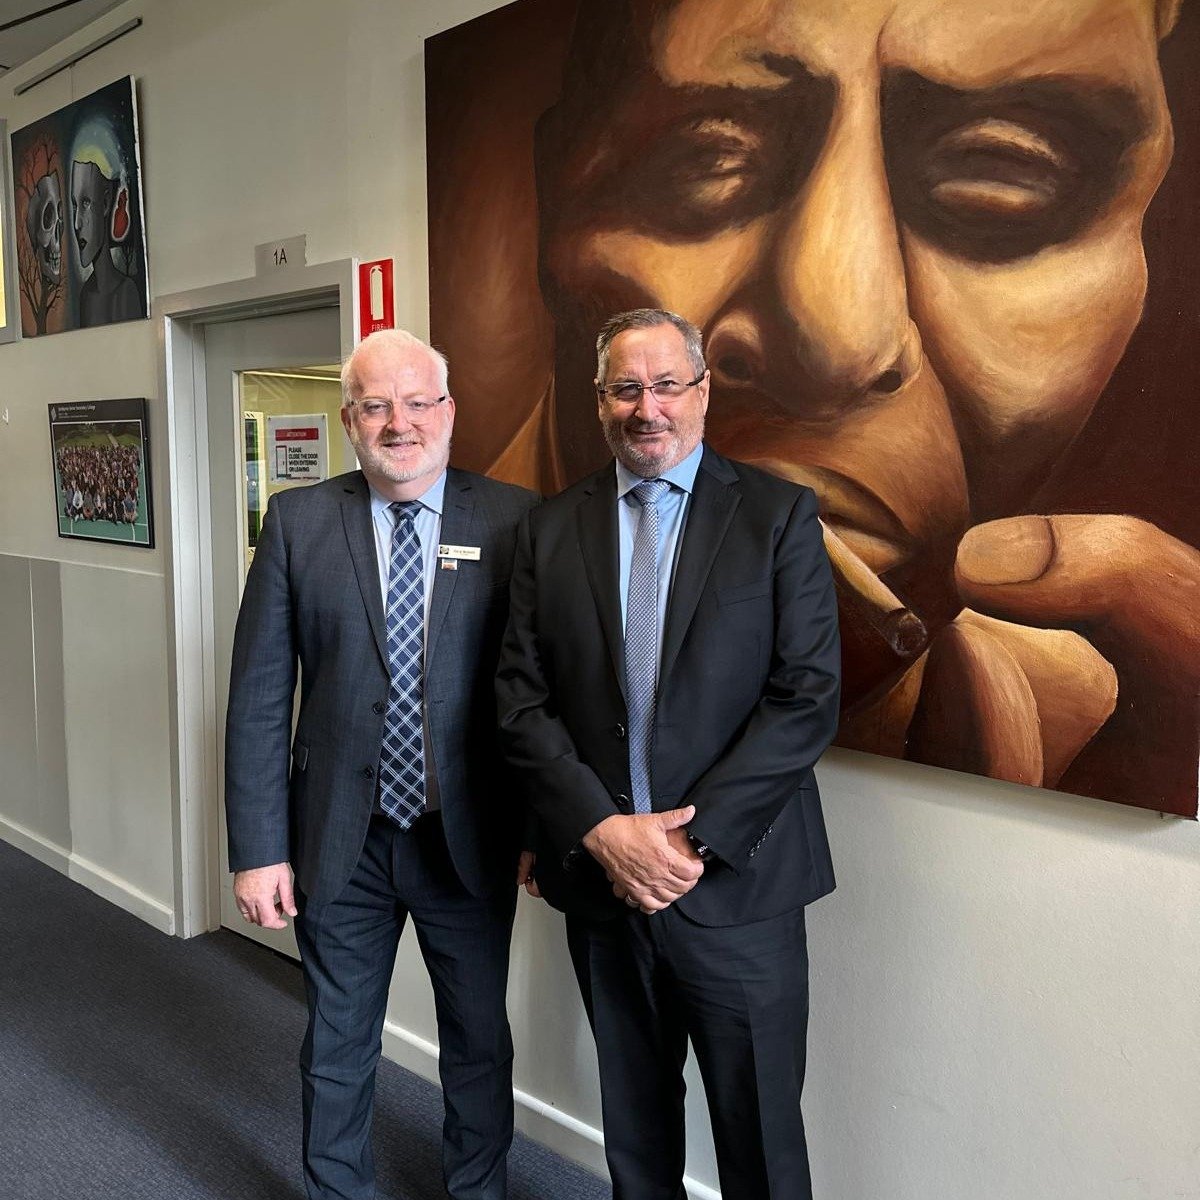 Daryl Bennett is the principal of Swinburne Senior Secondary College.

And on Tuesday, I joined him to officially open their brand new, competition-grade, world-class sports centre.

All thanks to the Allan Labor Government.

This 22.7 million projec